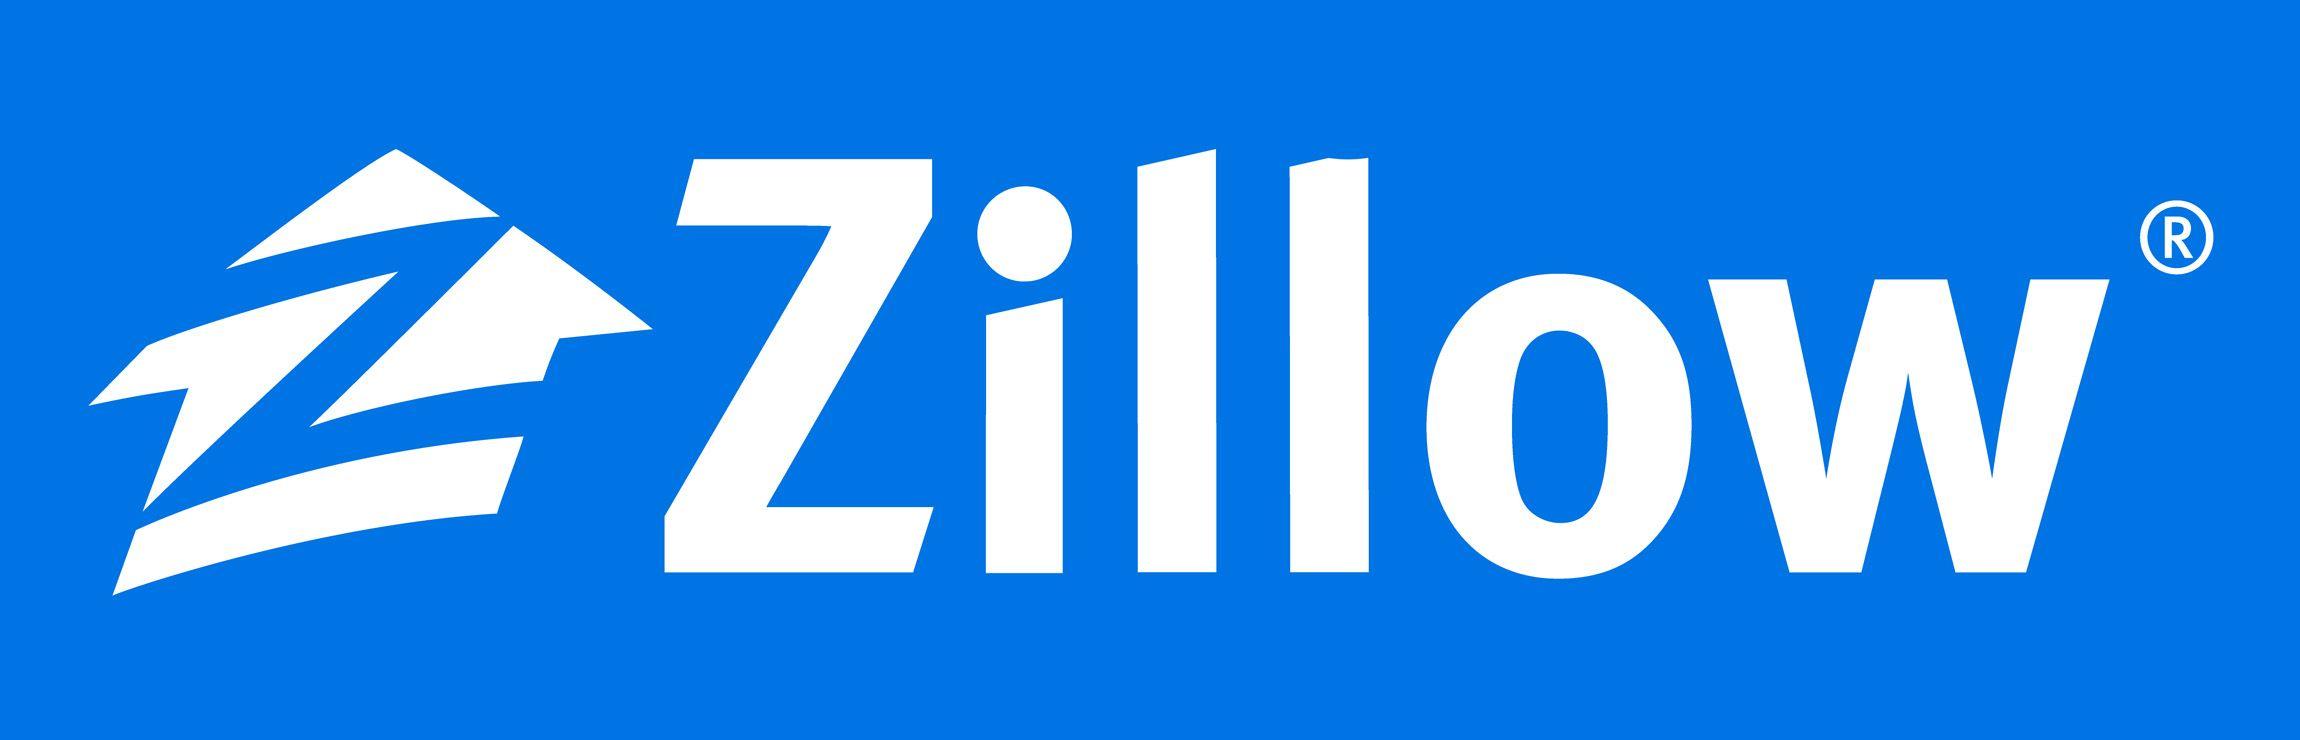 Zillow iPhone Logo - Zillow Logo, Zillow Symbol, Meaning, History and Evolution